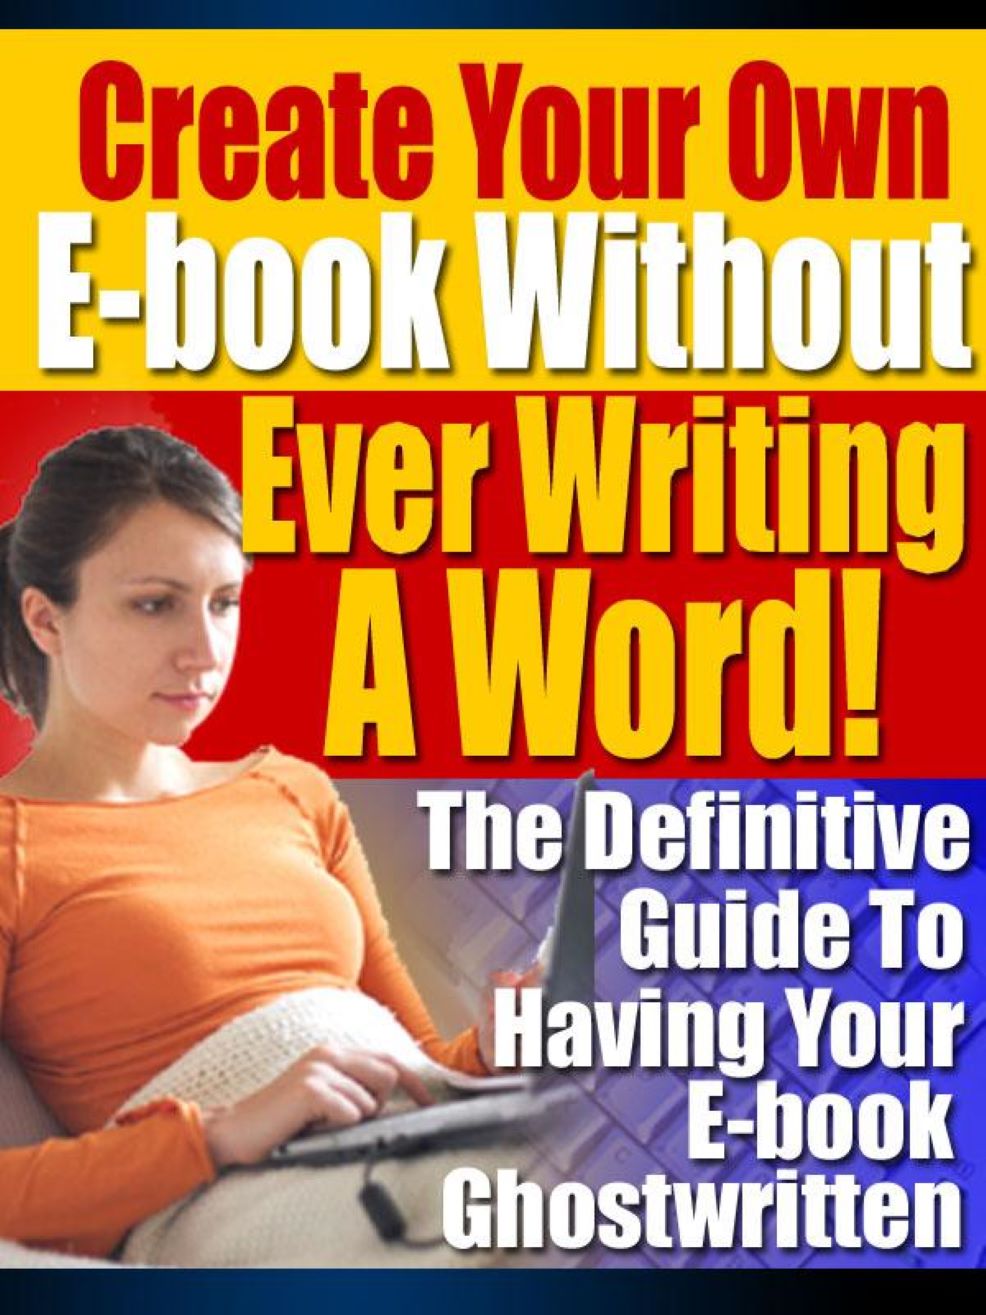 Create Your Own eBook Without Ever Writing A Word